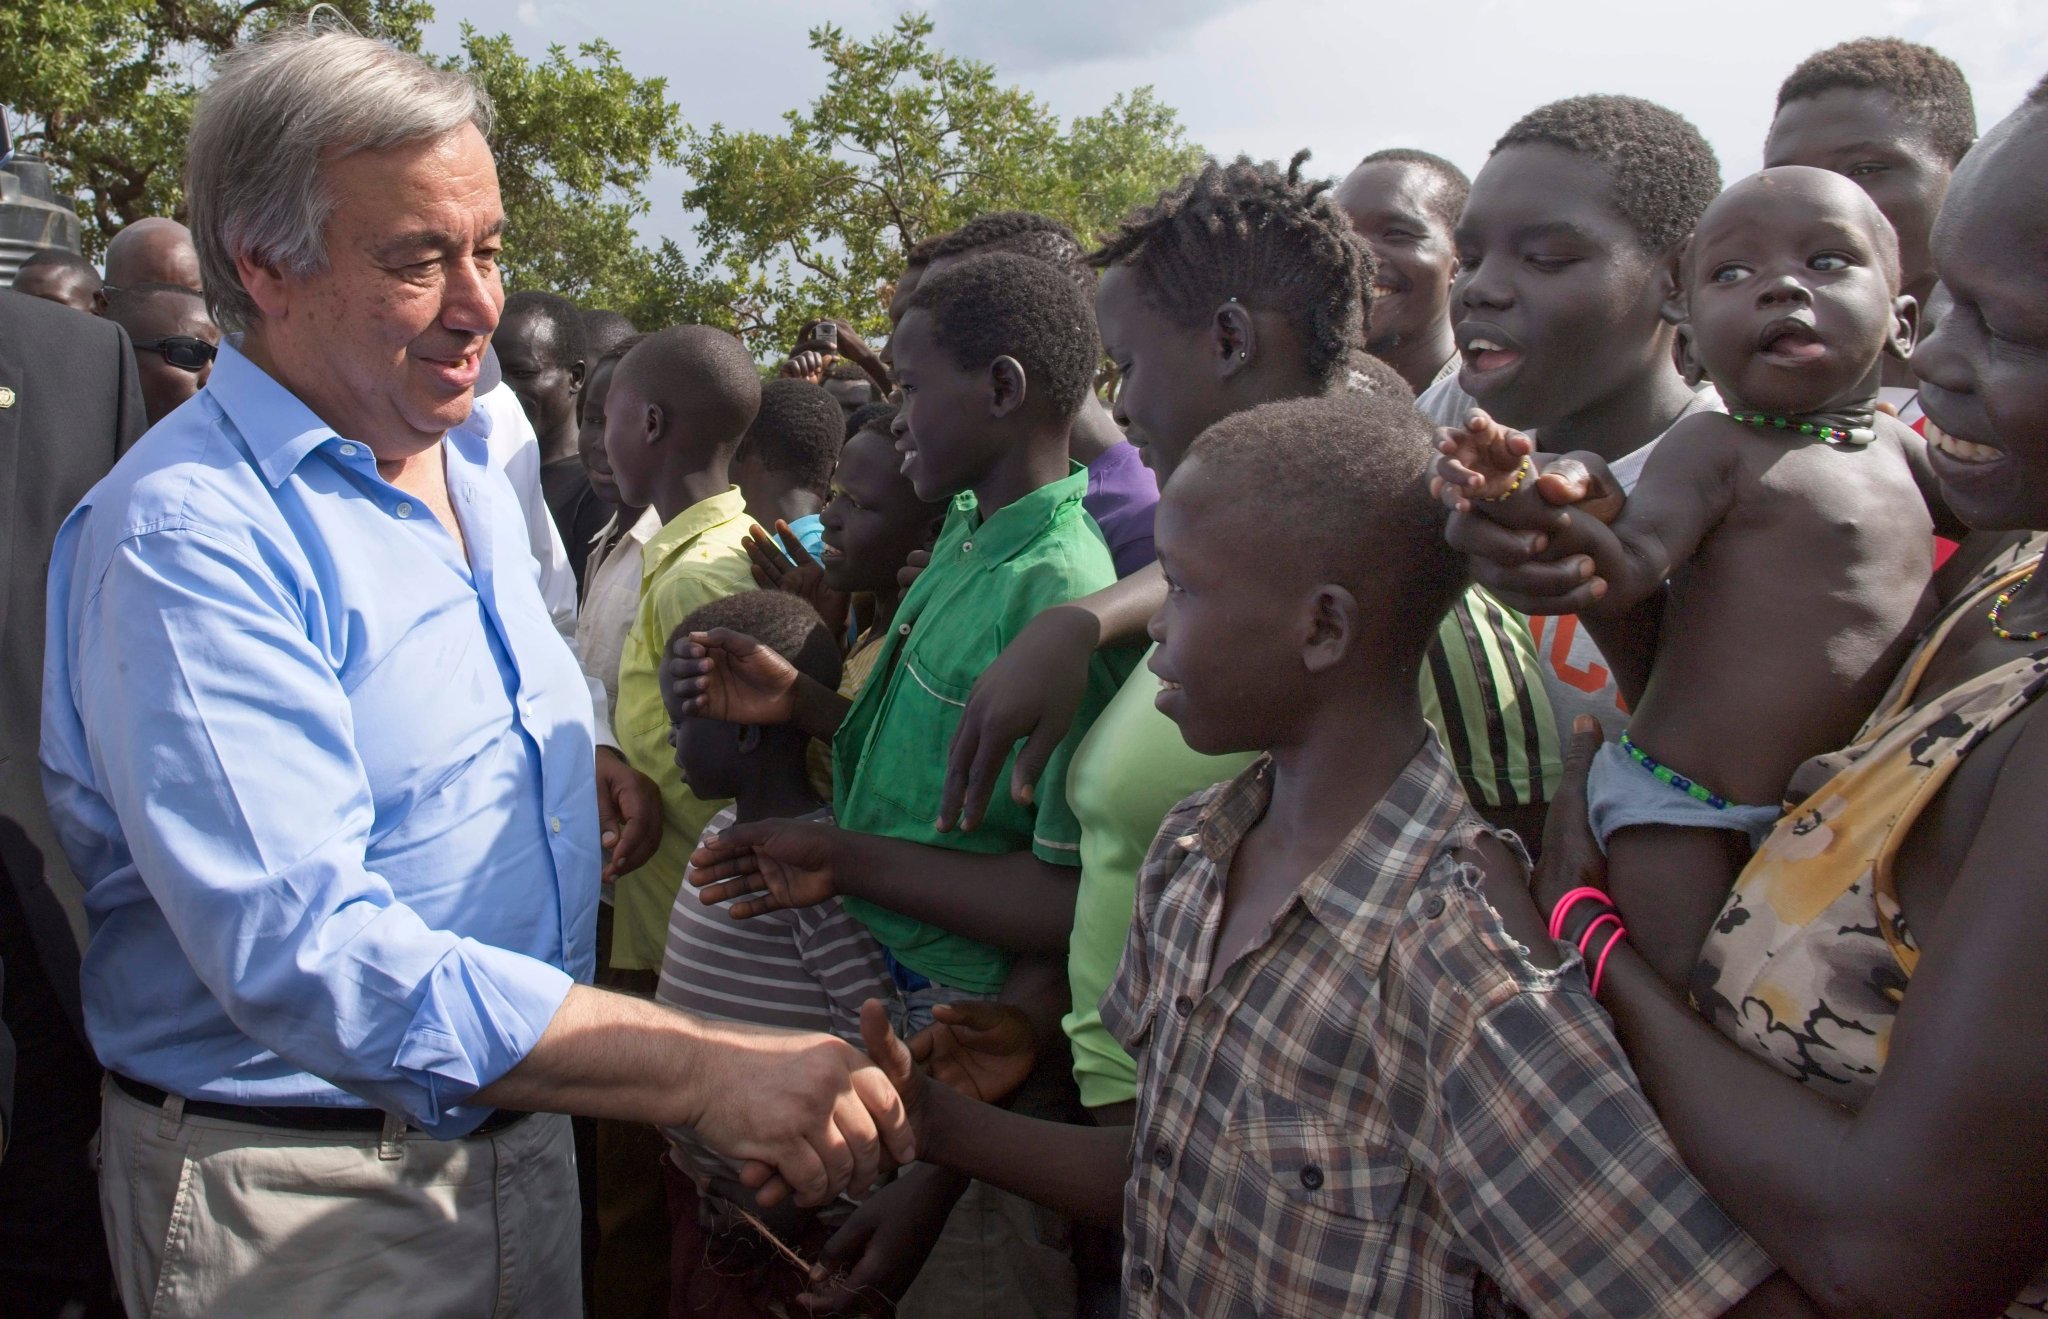 Guterres tells leaders to protect their citizens from violence